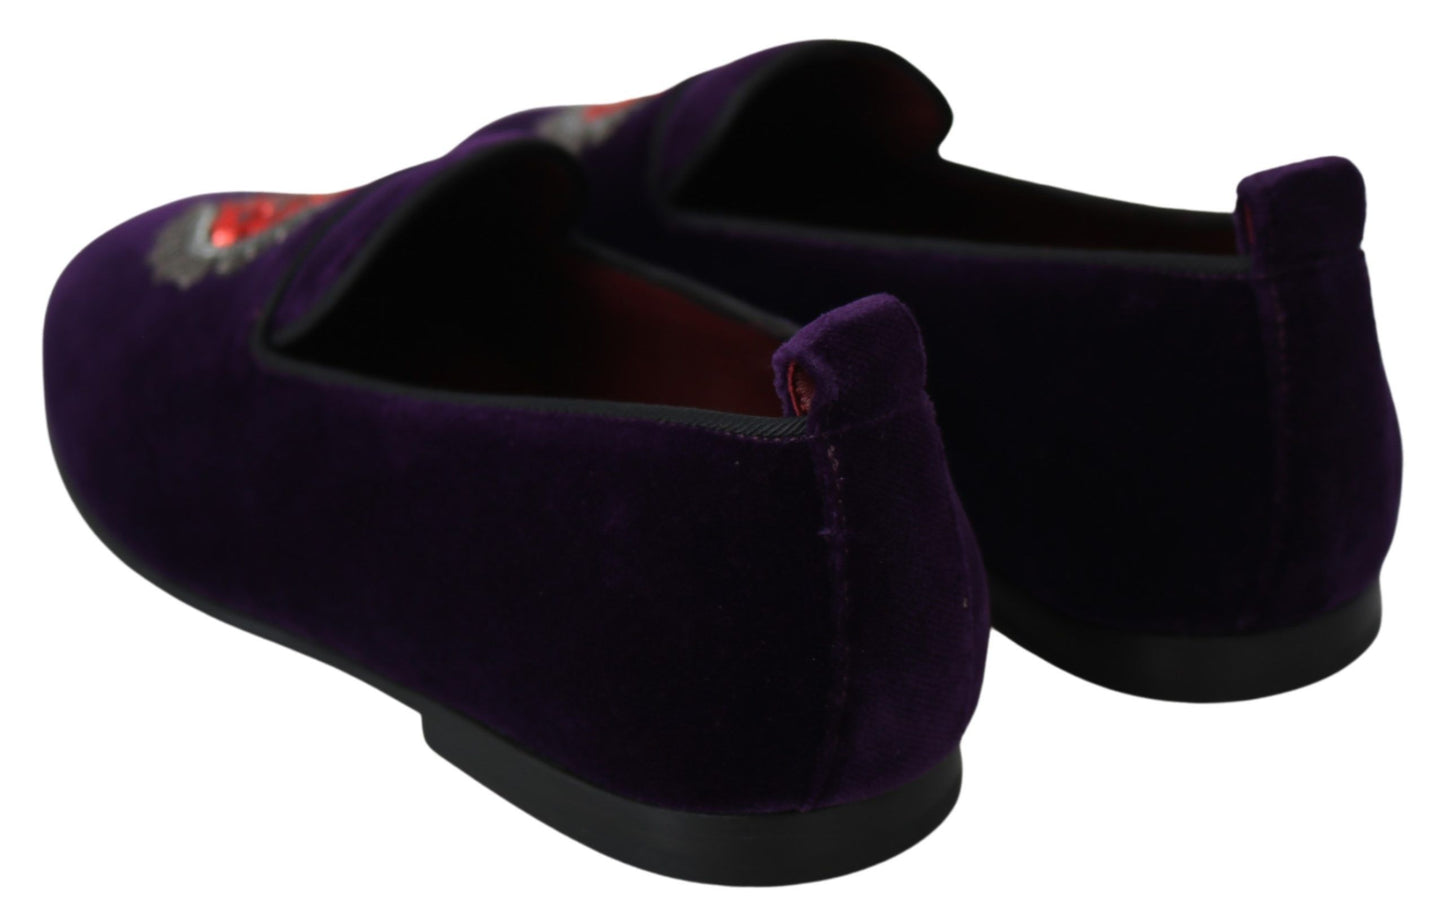 Enchanted Heart Embroidered Velvet Loafers